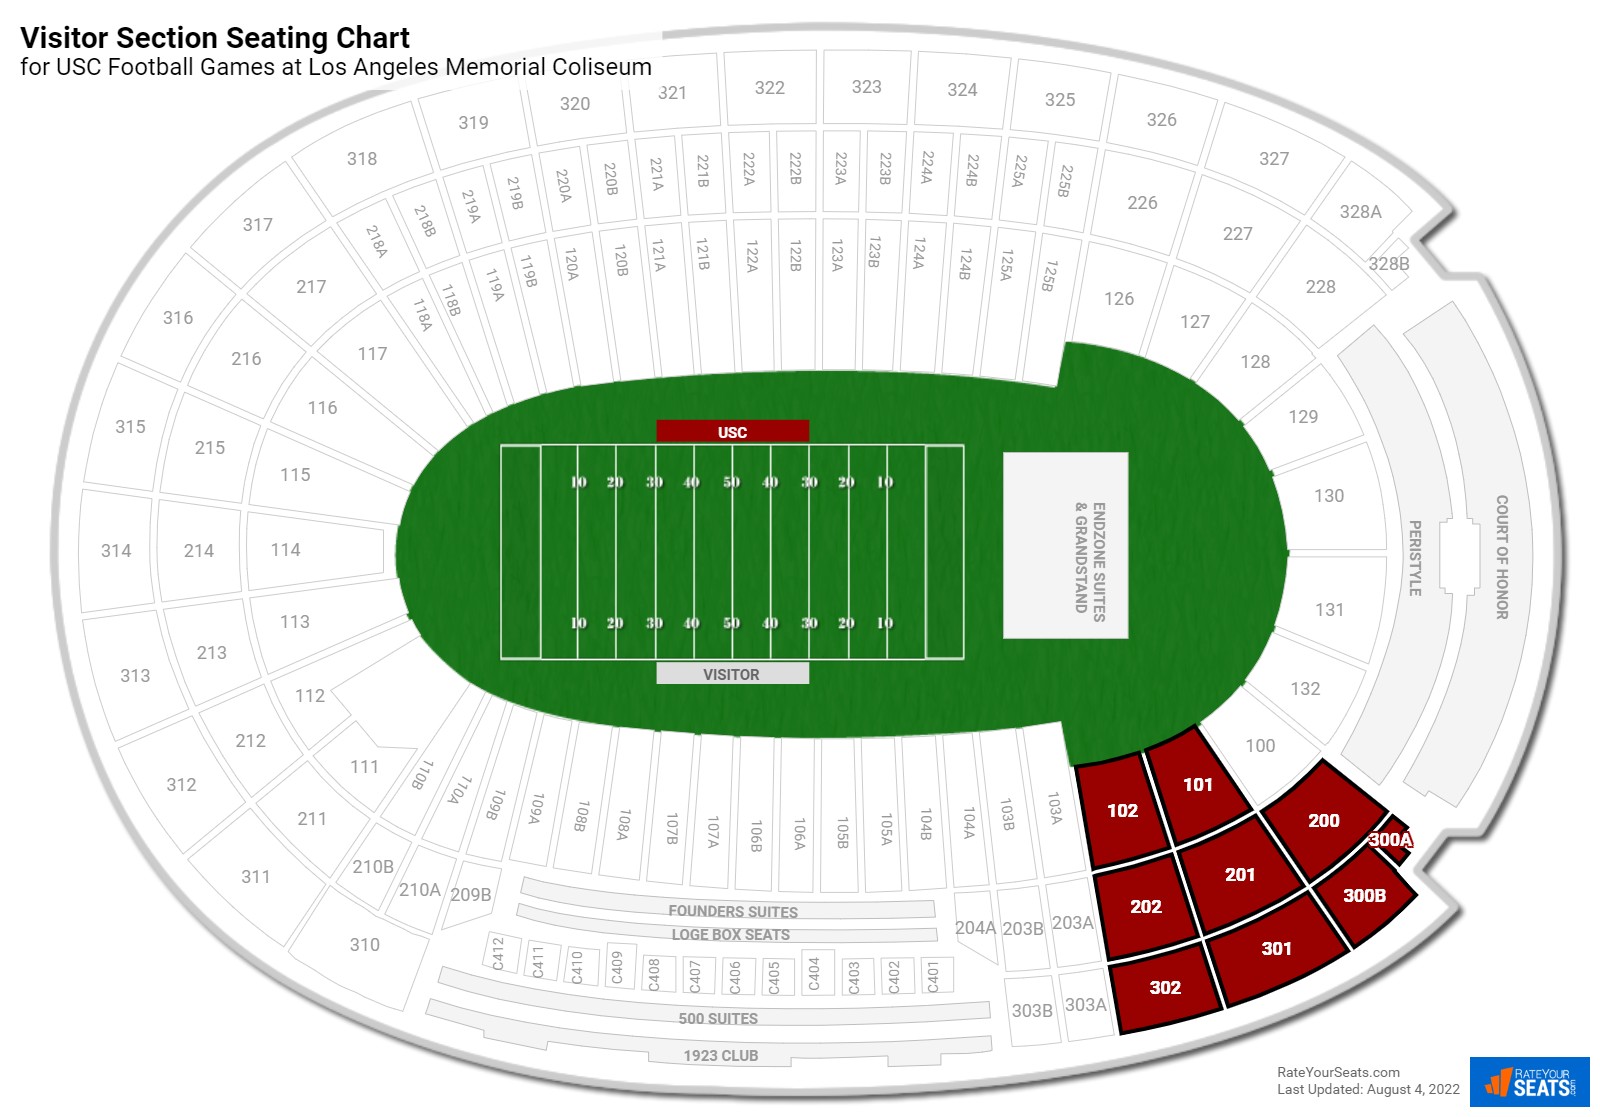 USC Visitor Section Seating Chart at Los Angeles Memorial Coliseum